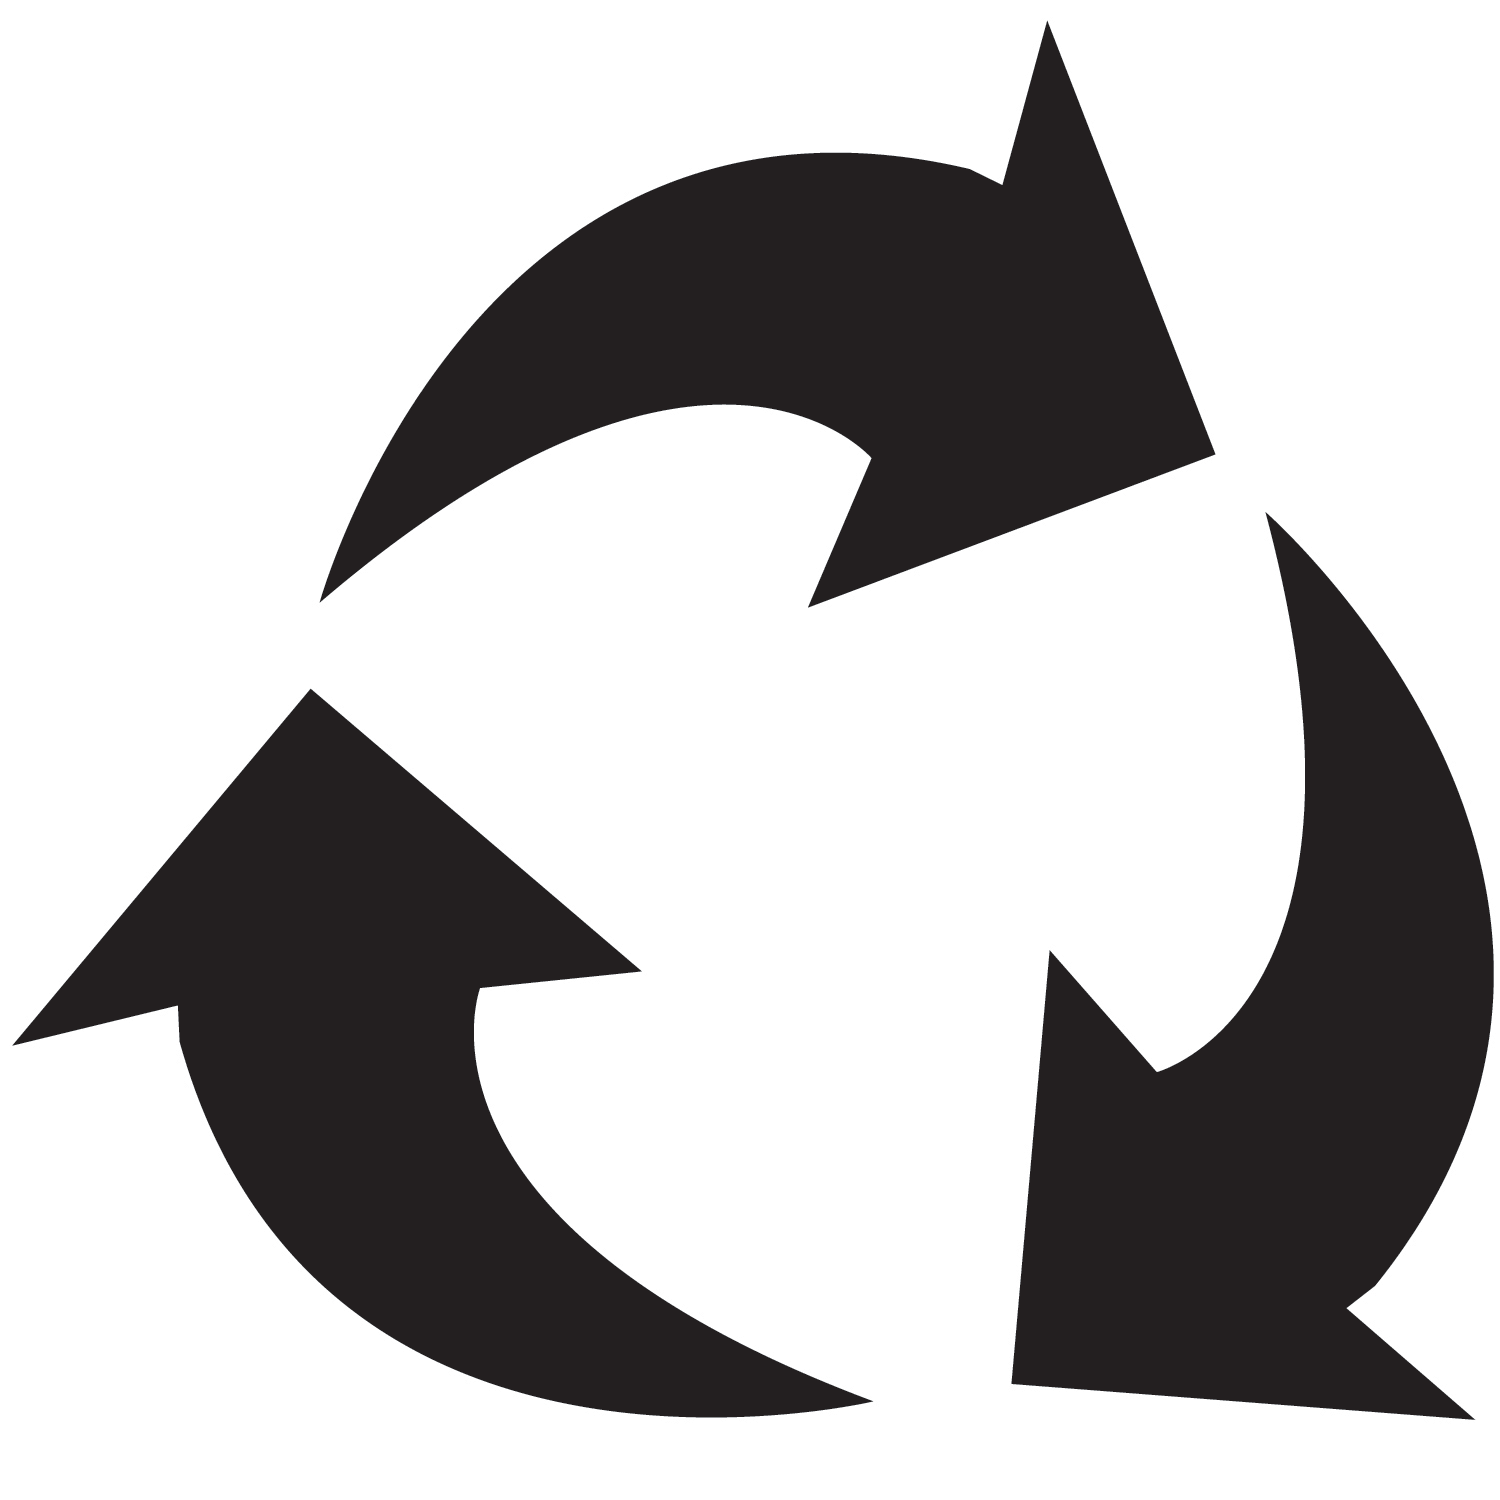 10 Different Styles of Recycling Symbol, Free to Download 